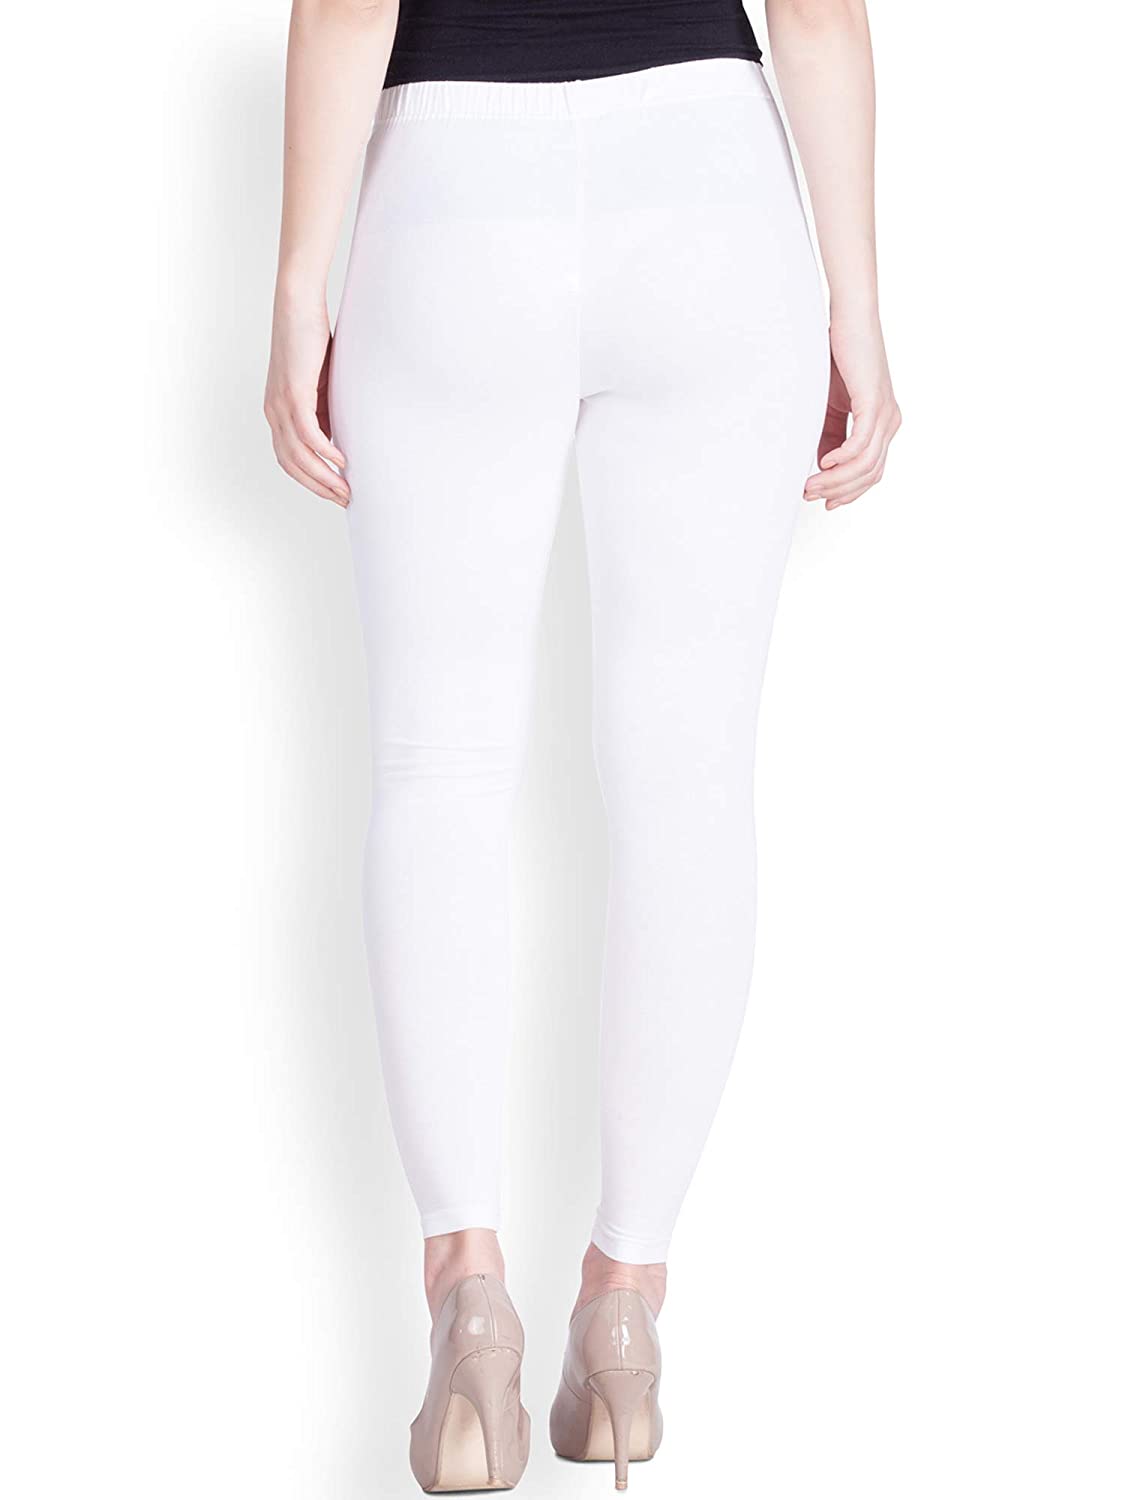 Buy Lux Lyra Legging L33 Rani Free Size Online at Low Prices in India at  Bigdeals24x7.com